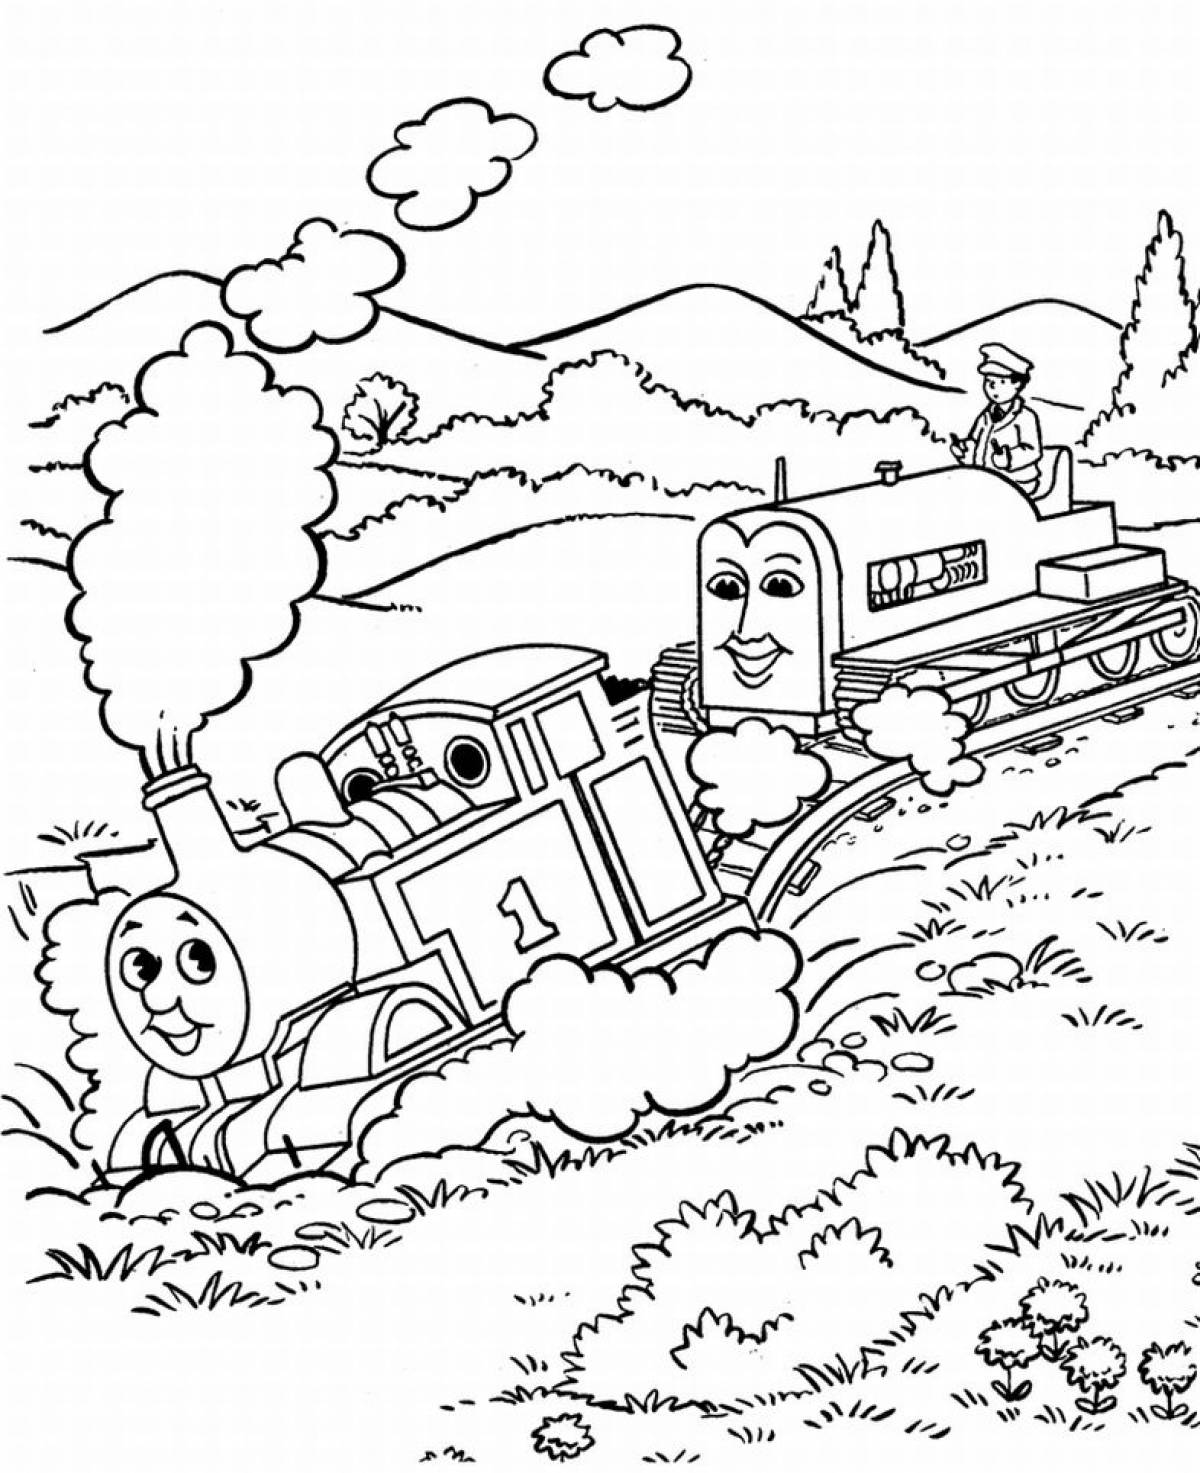 Thomas the Tank Engine picture